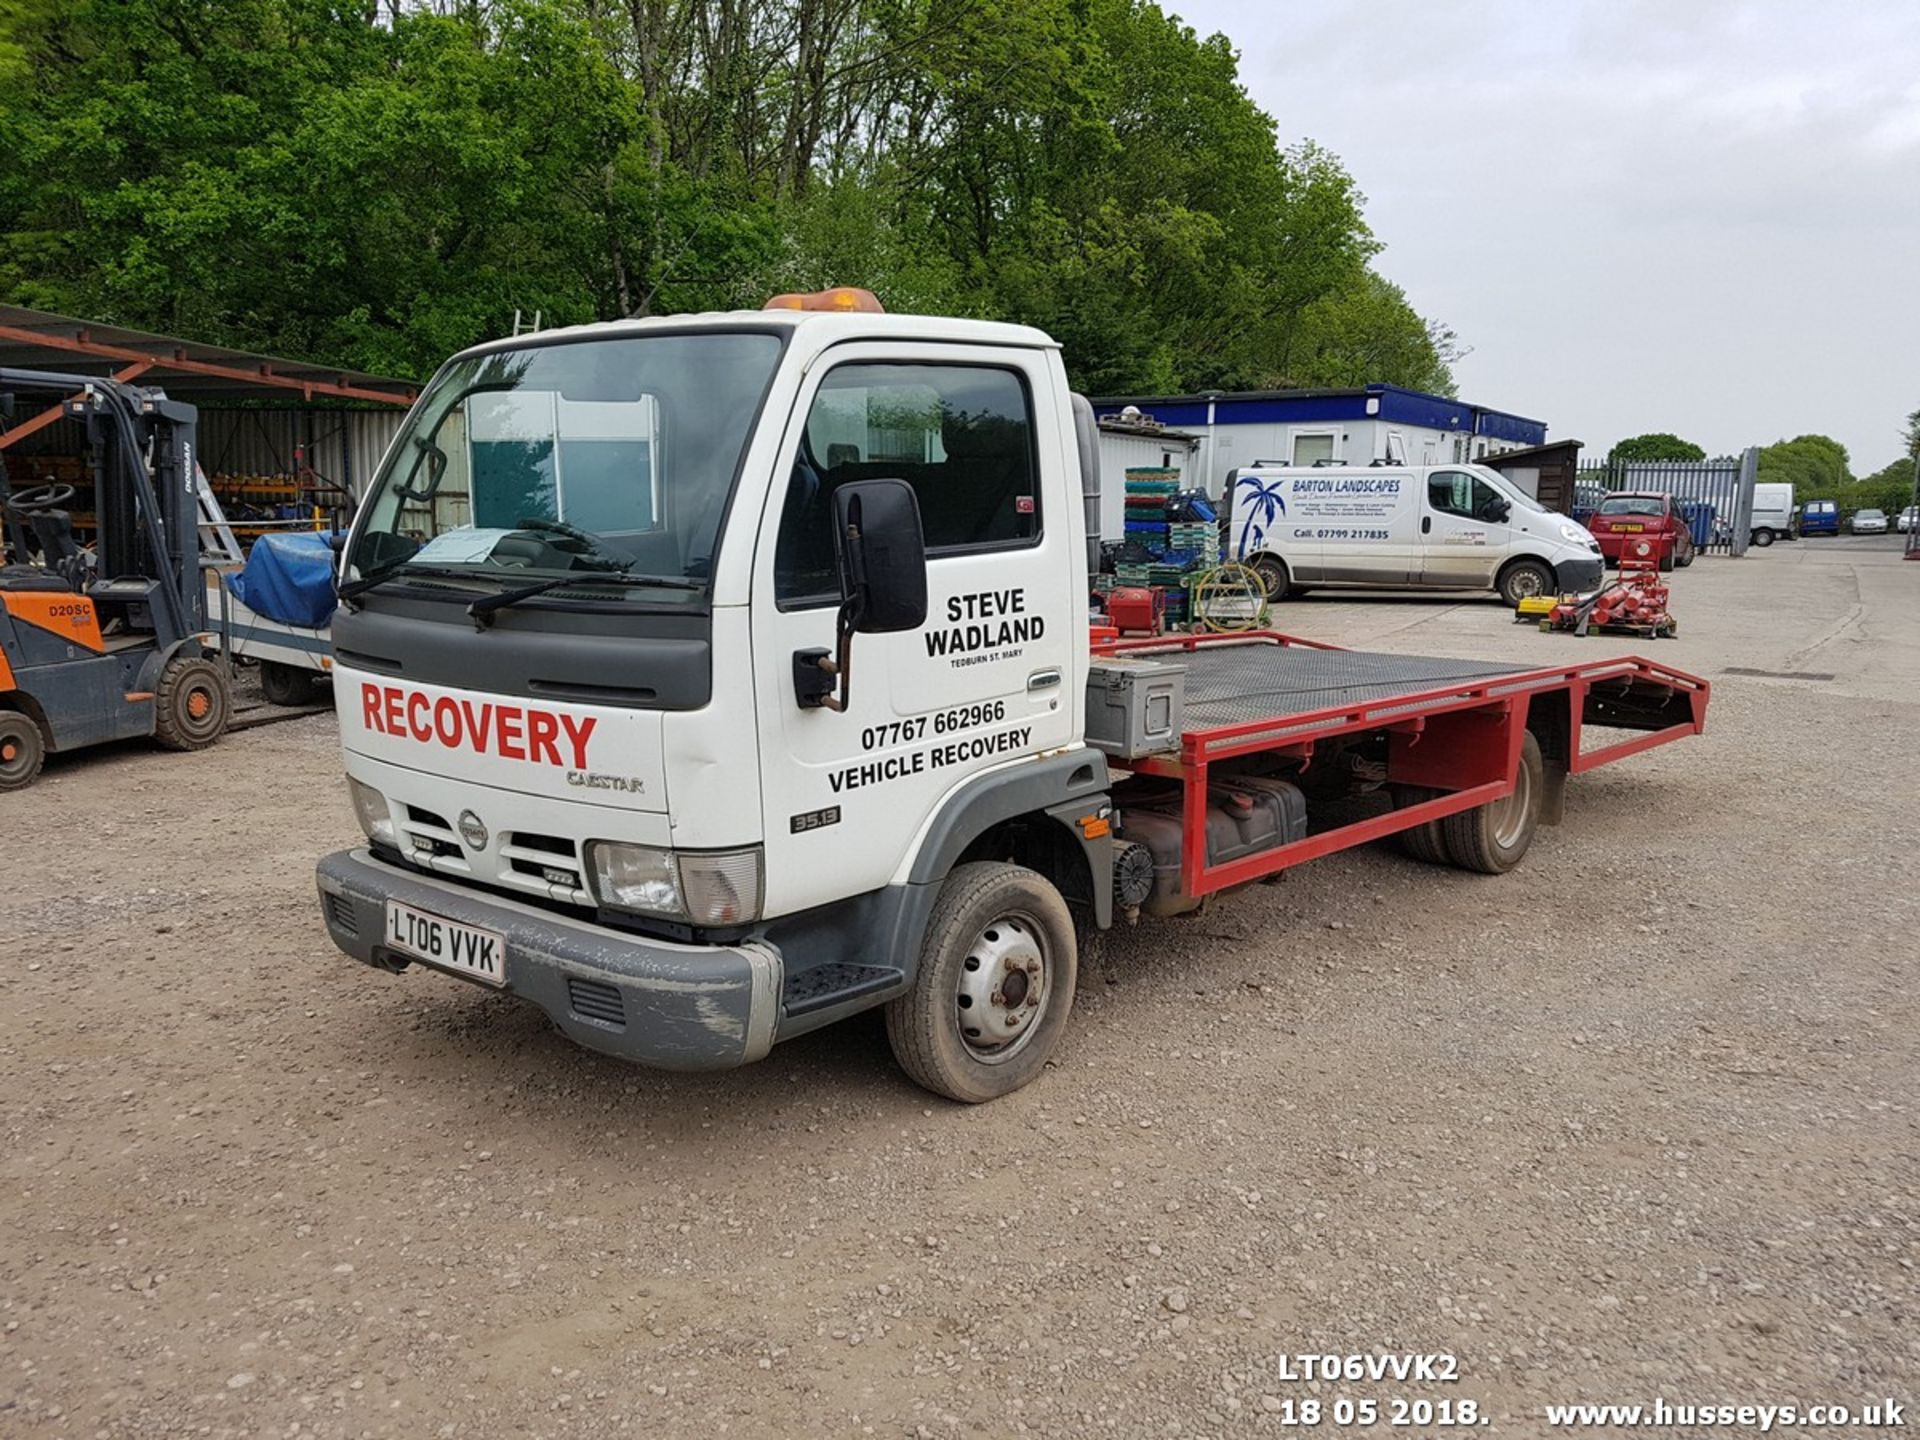 2006 NISSAN CABSTAR 35.13 MWB RECOVERY LORRY - Image 2 of 6